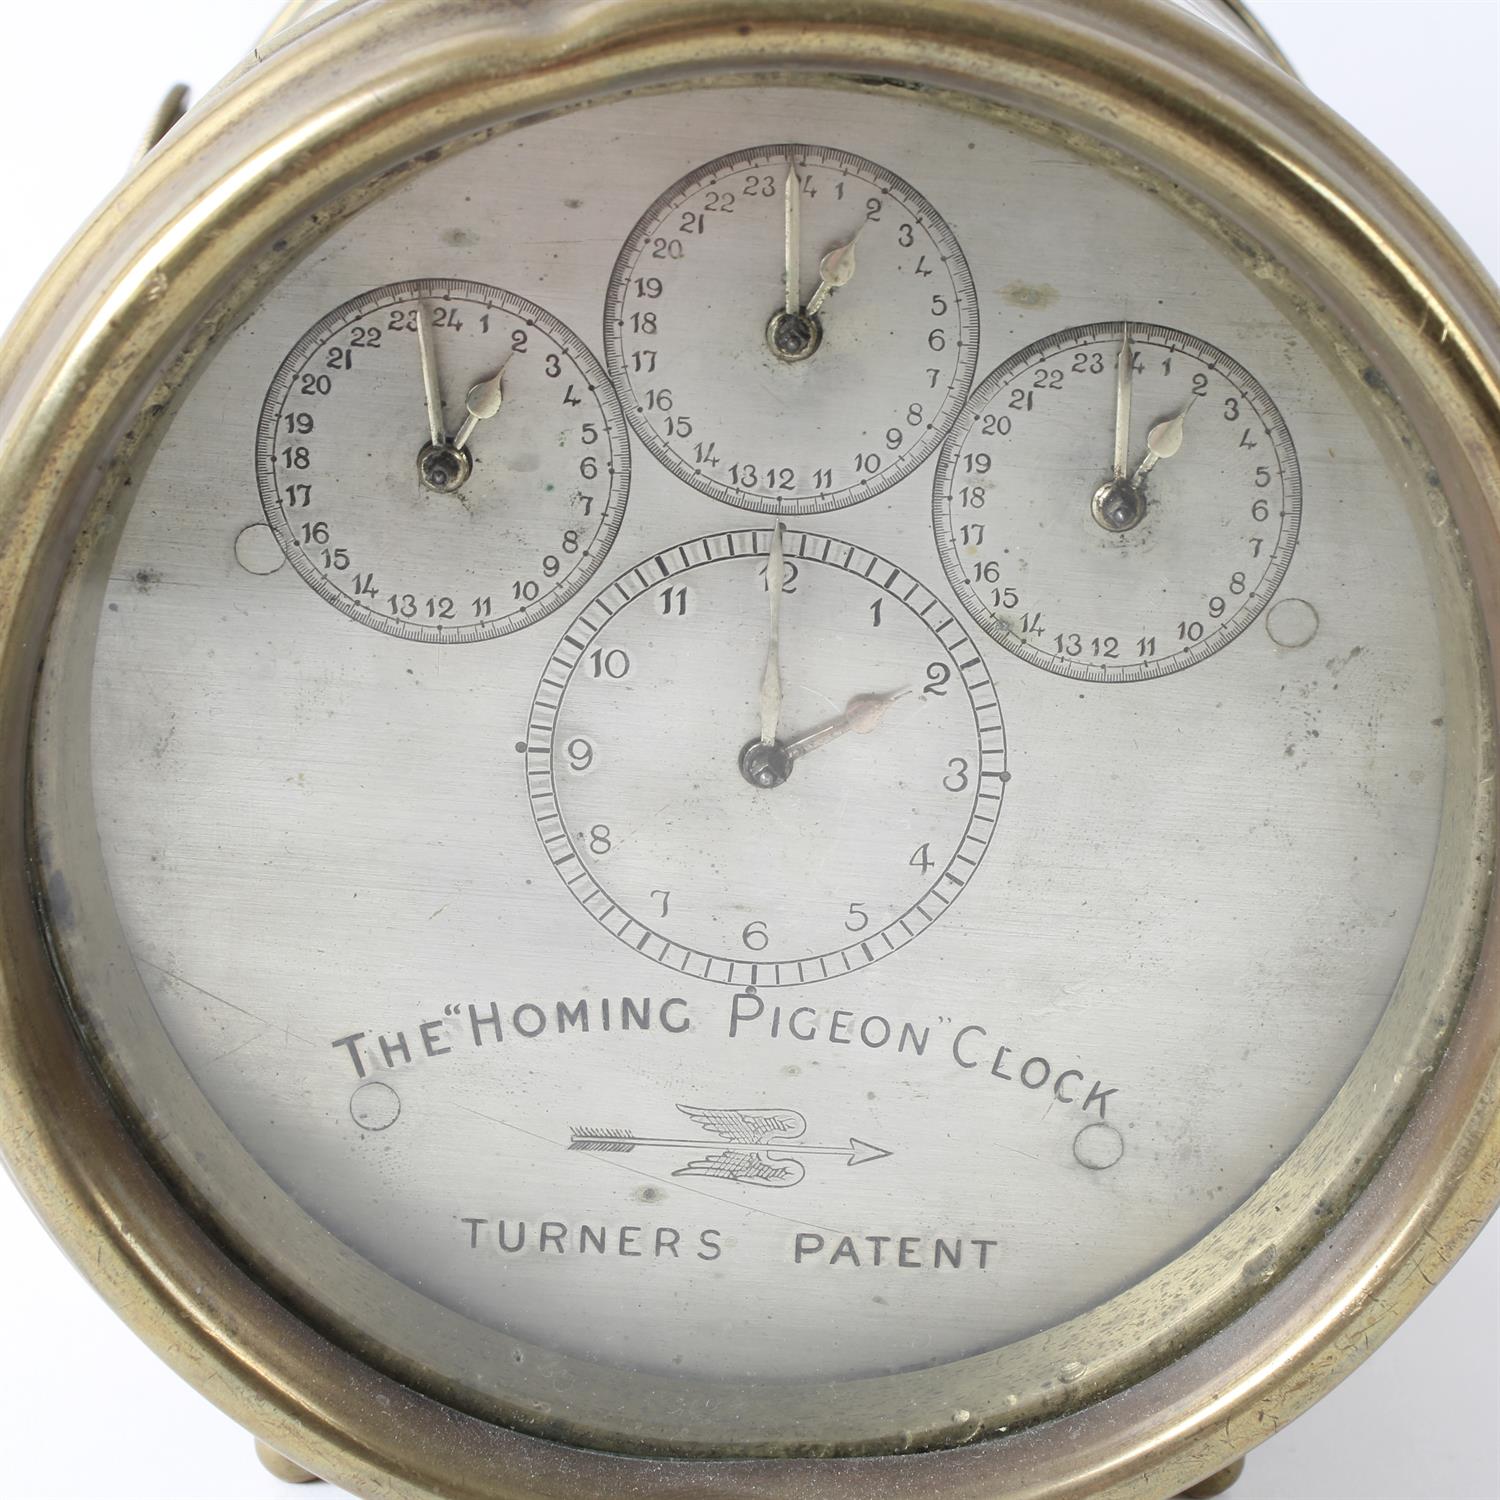 Turner's Patent brass-cased Homing Pigeon clock - Image 2 of 6